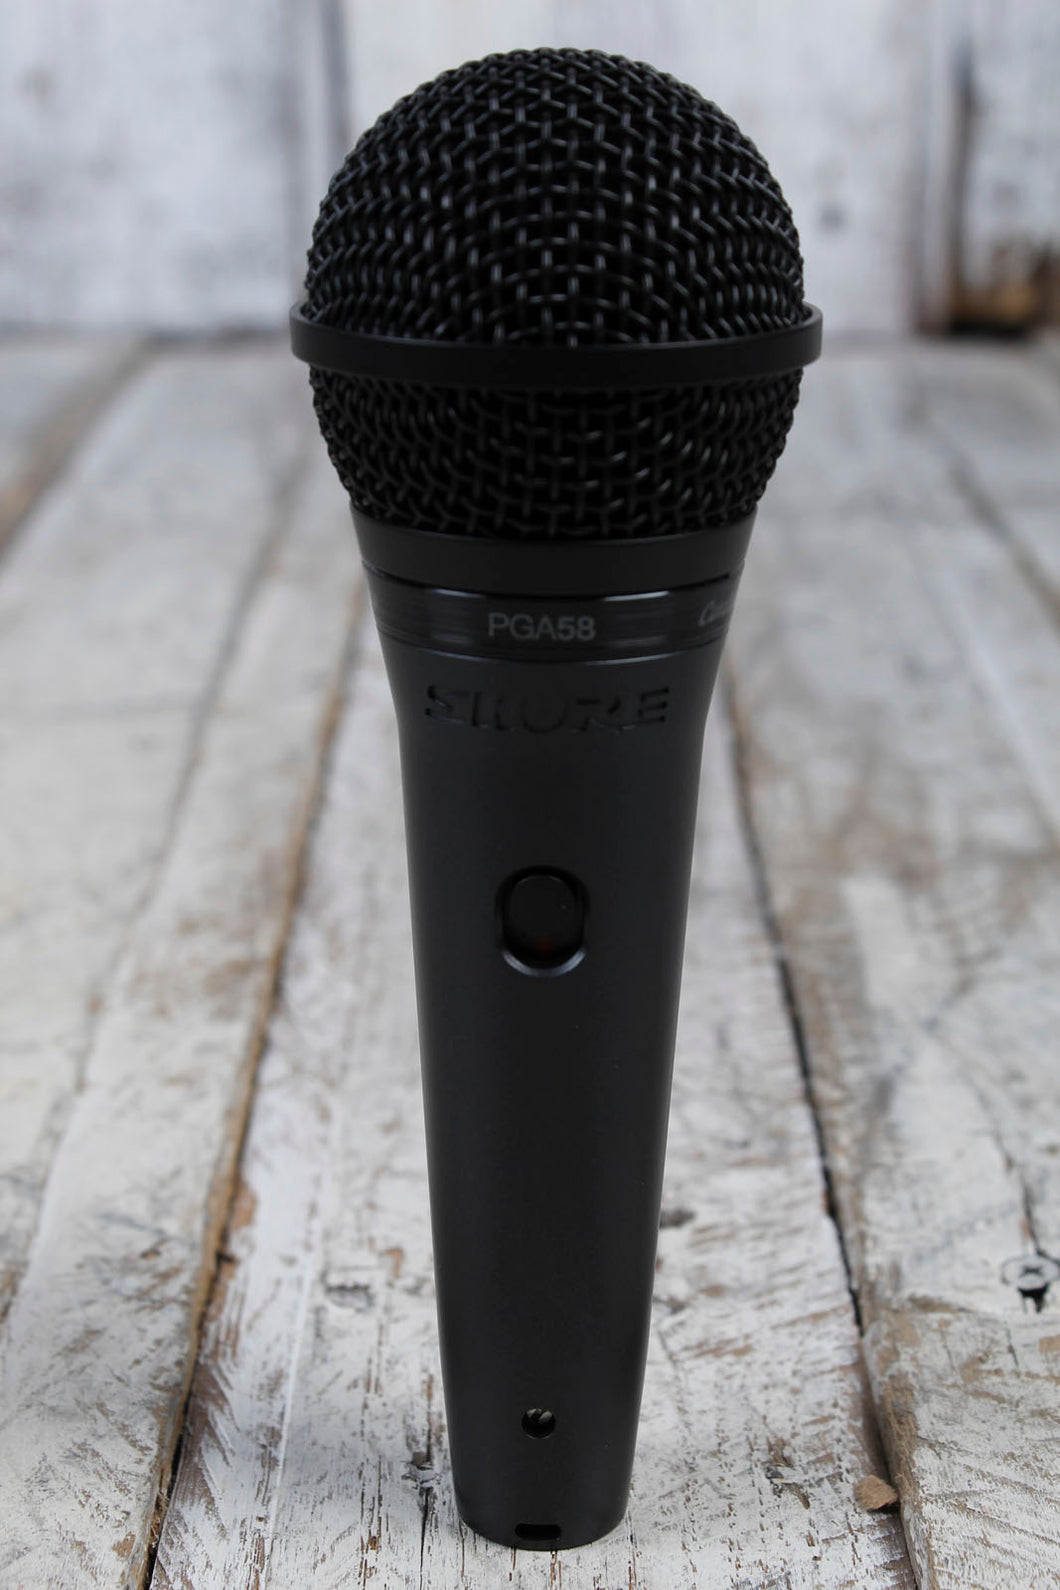 Shure PGA58 Cardioid dynamic vocal microphone with XLR cable